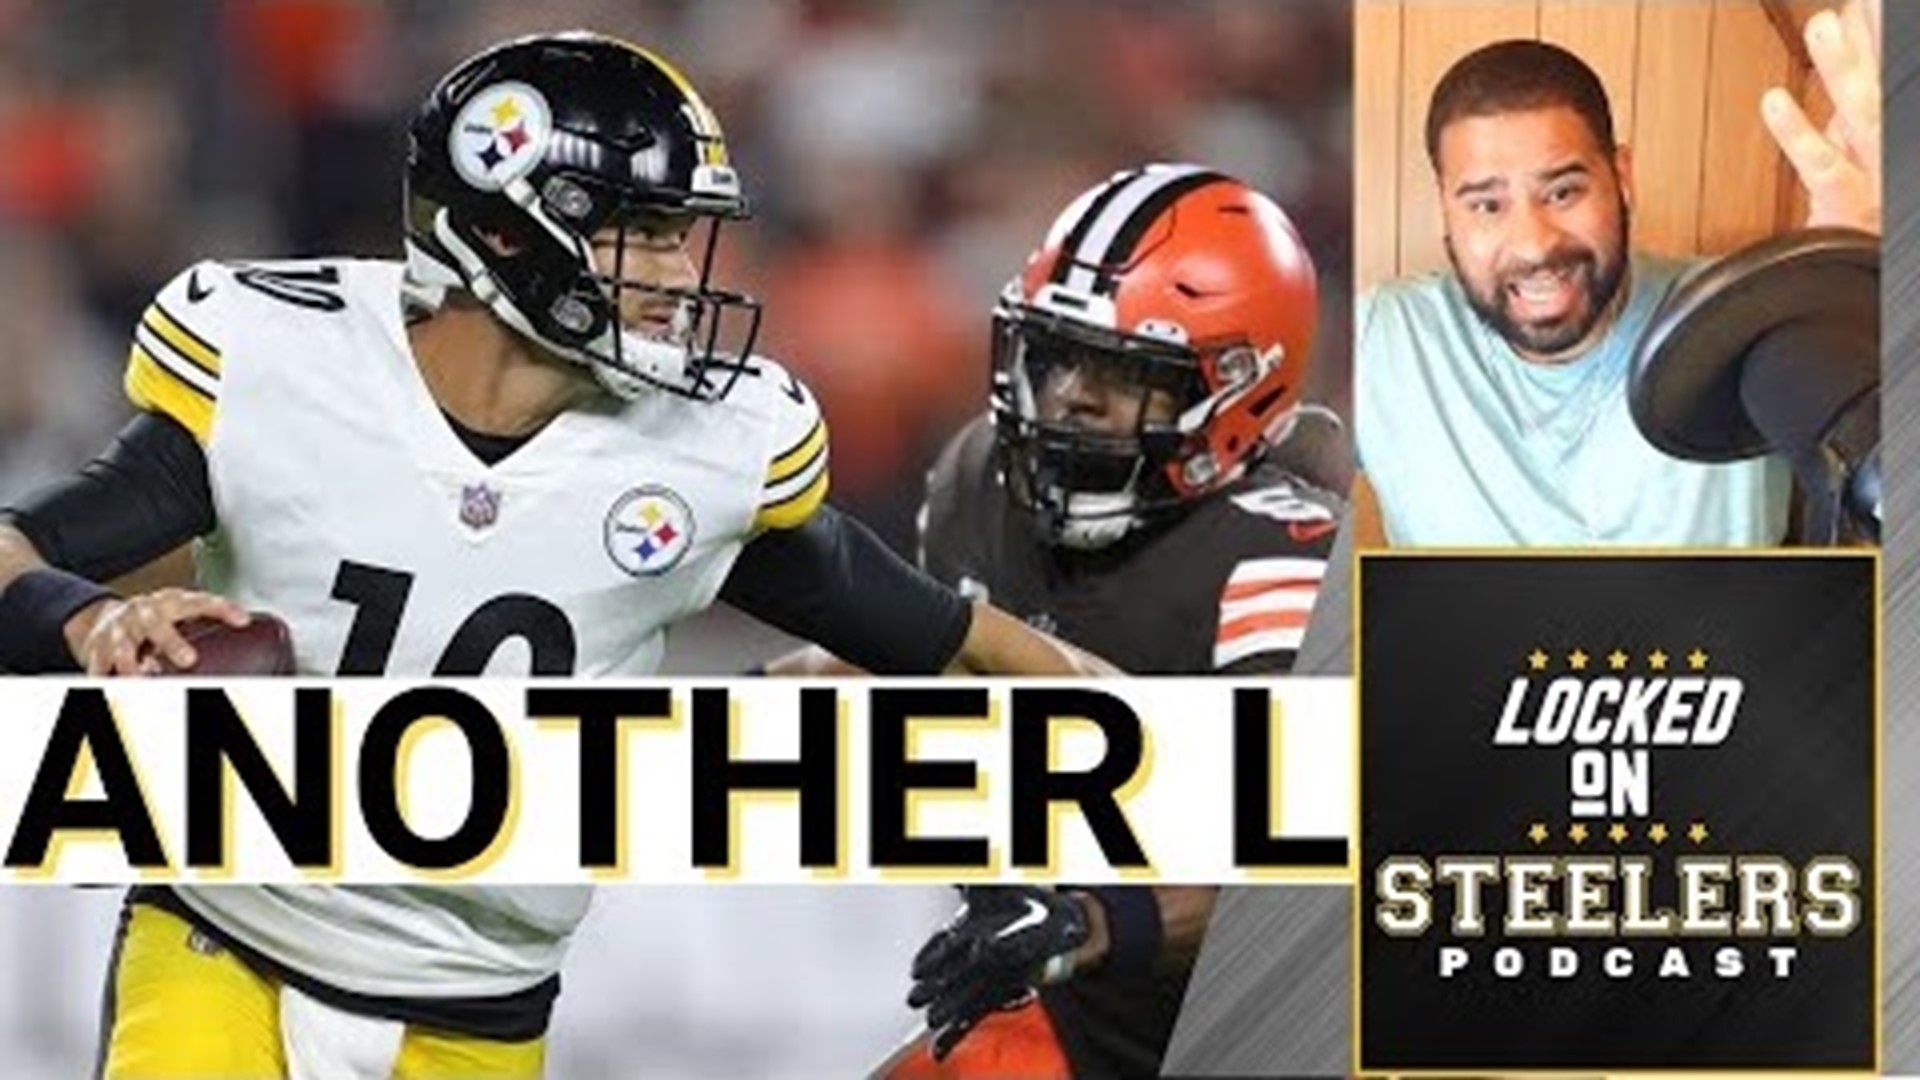 The Pittsburgh Steelers lost to the Cleveland Browns 29-17 Thursday night as Mitch Trubisky looked slightly better, but still not good enough to run the offense.